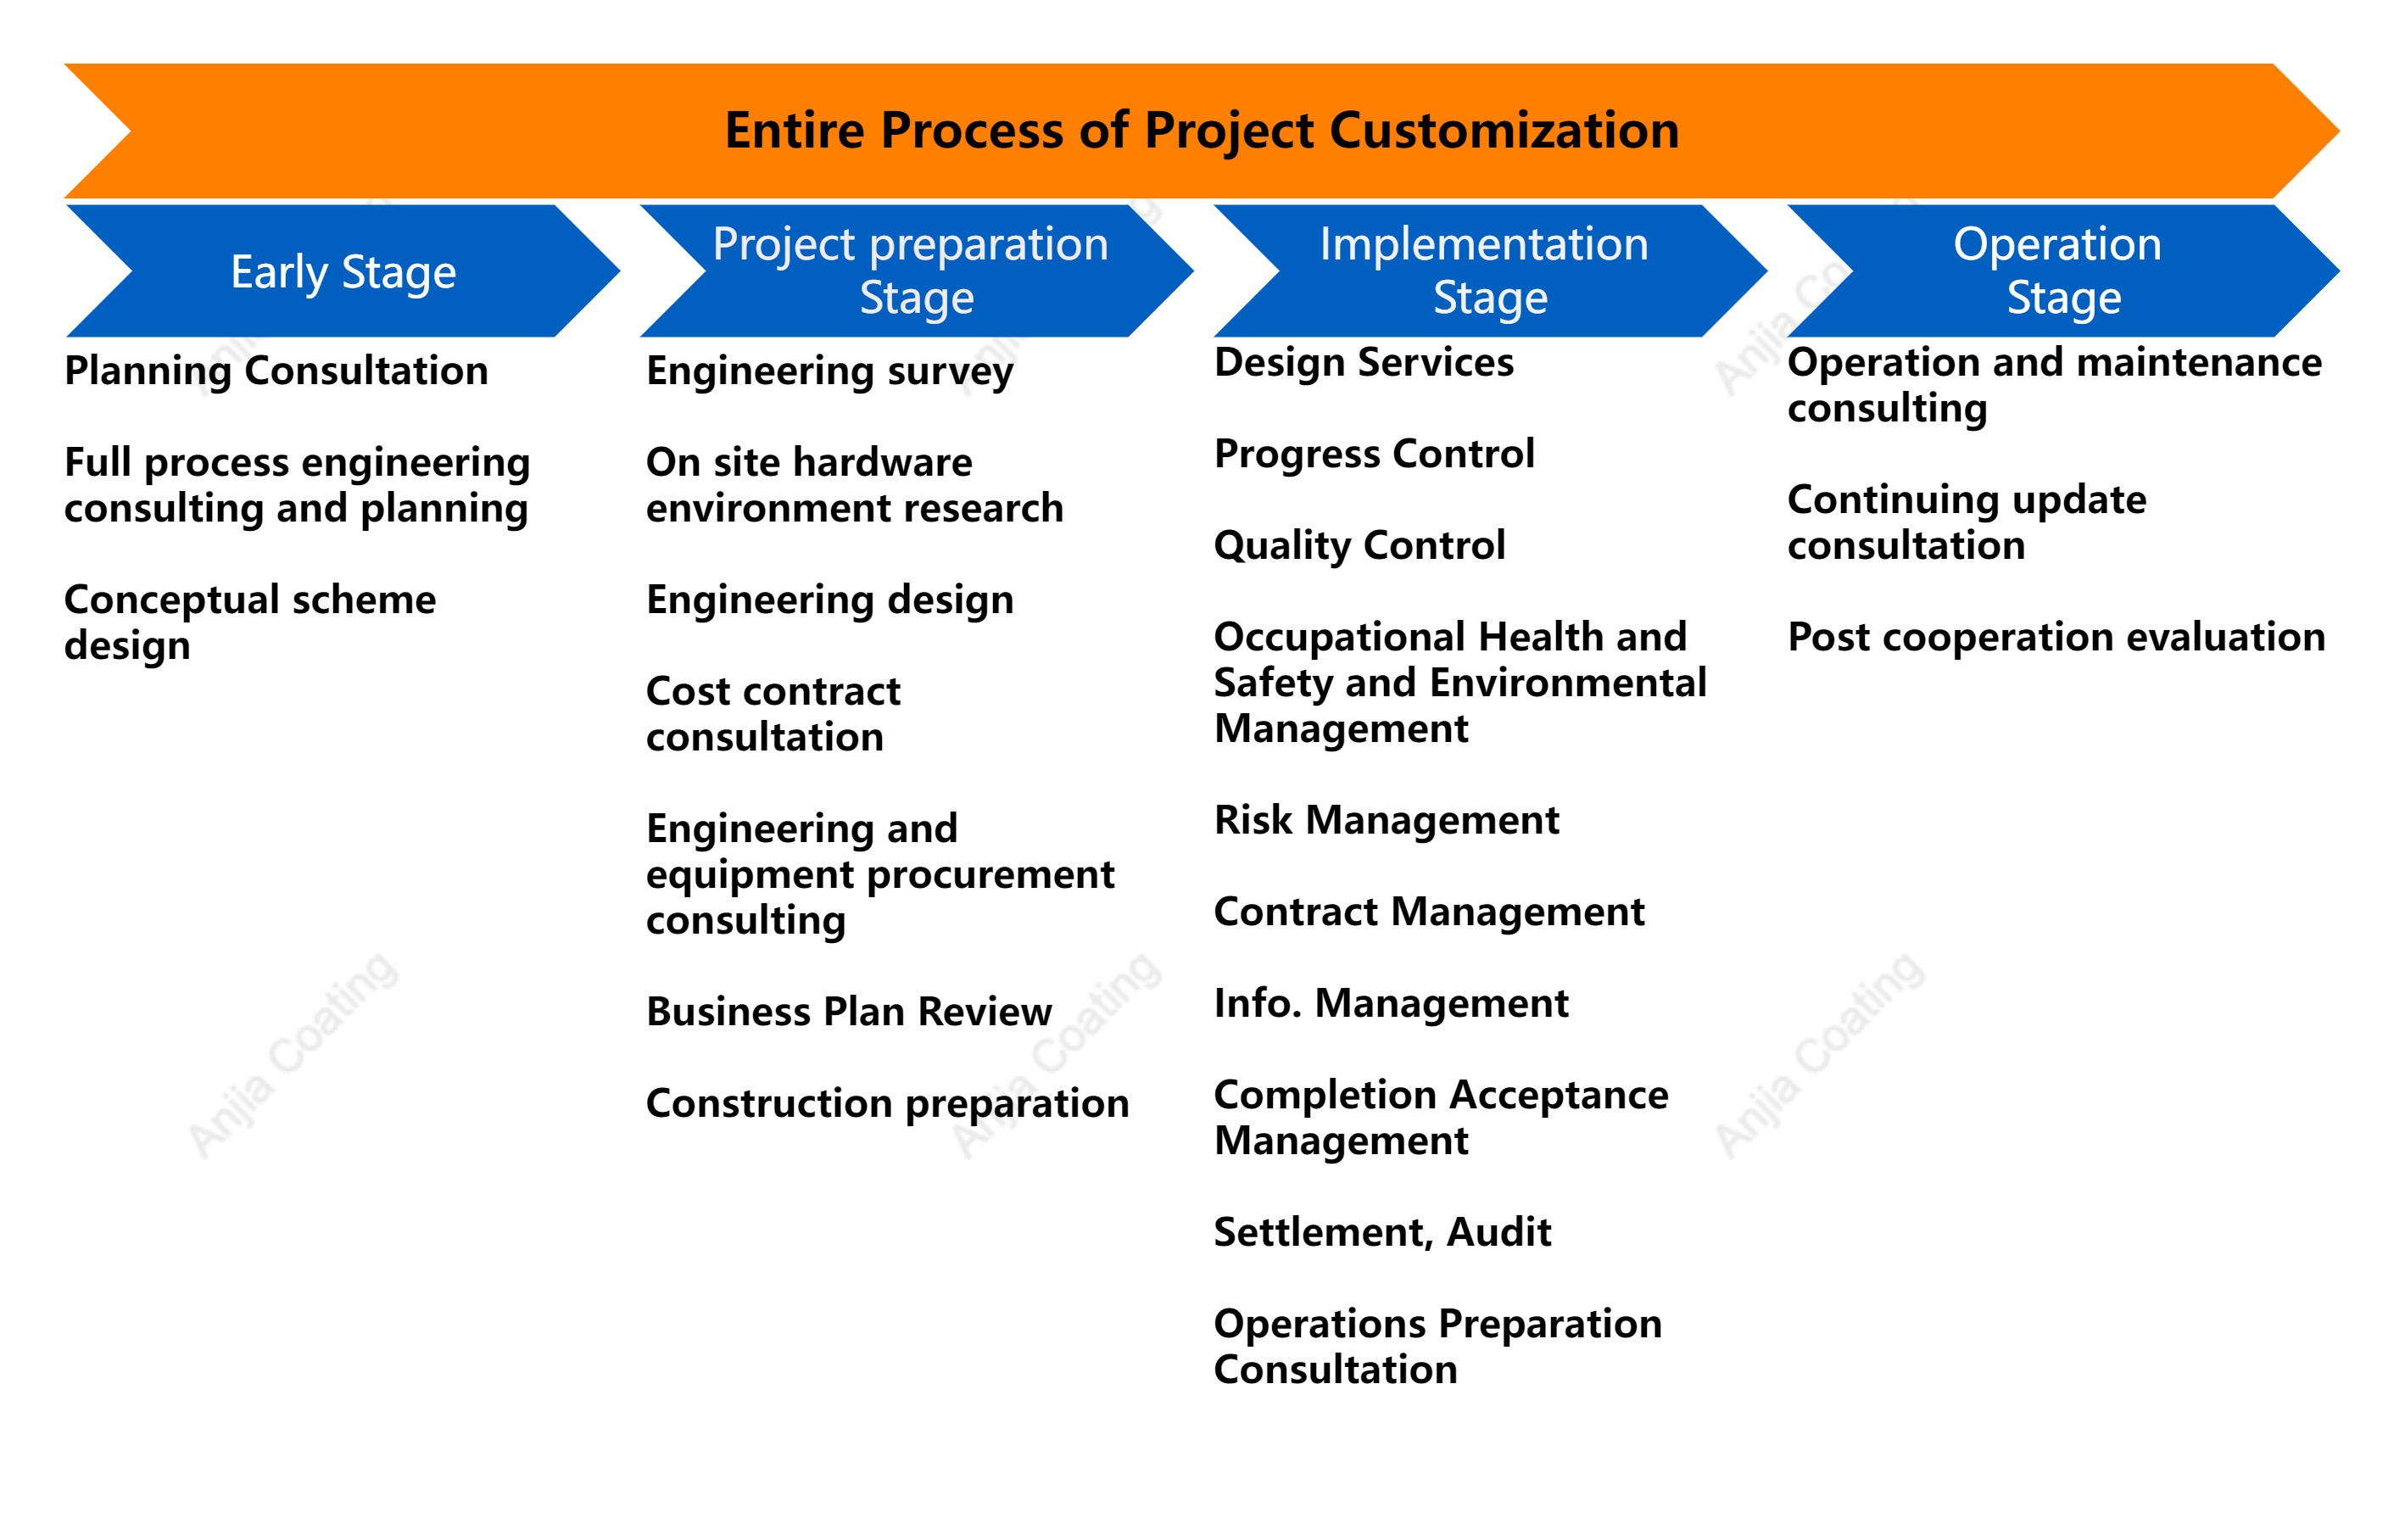 Entire Process of Project Customization